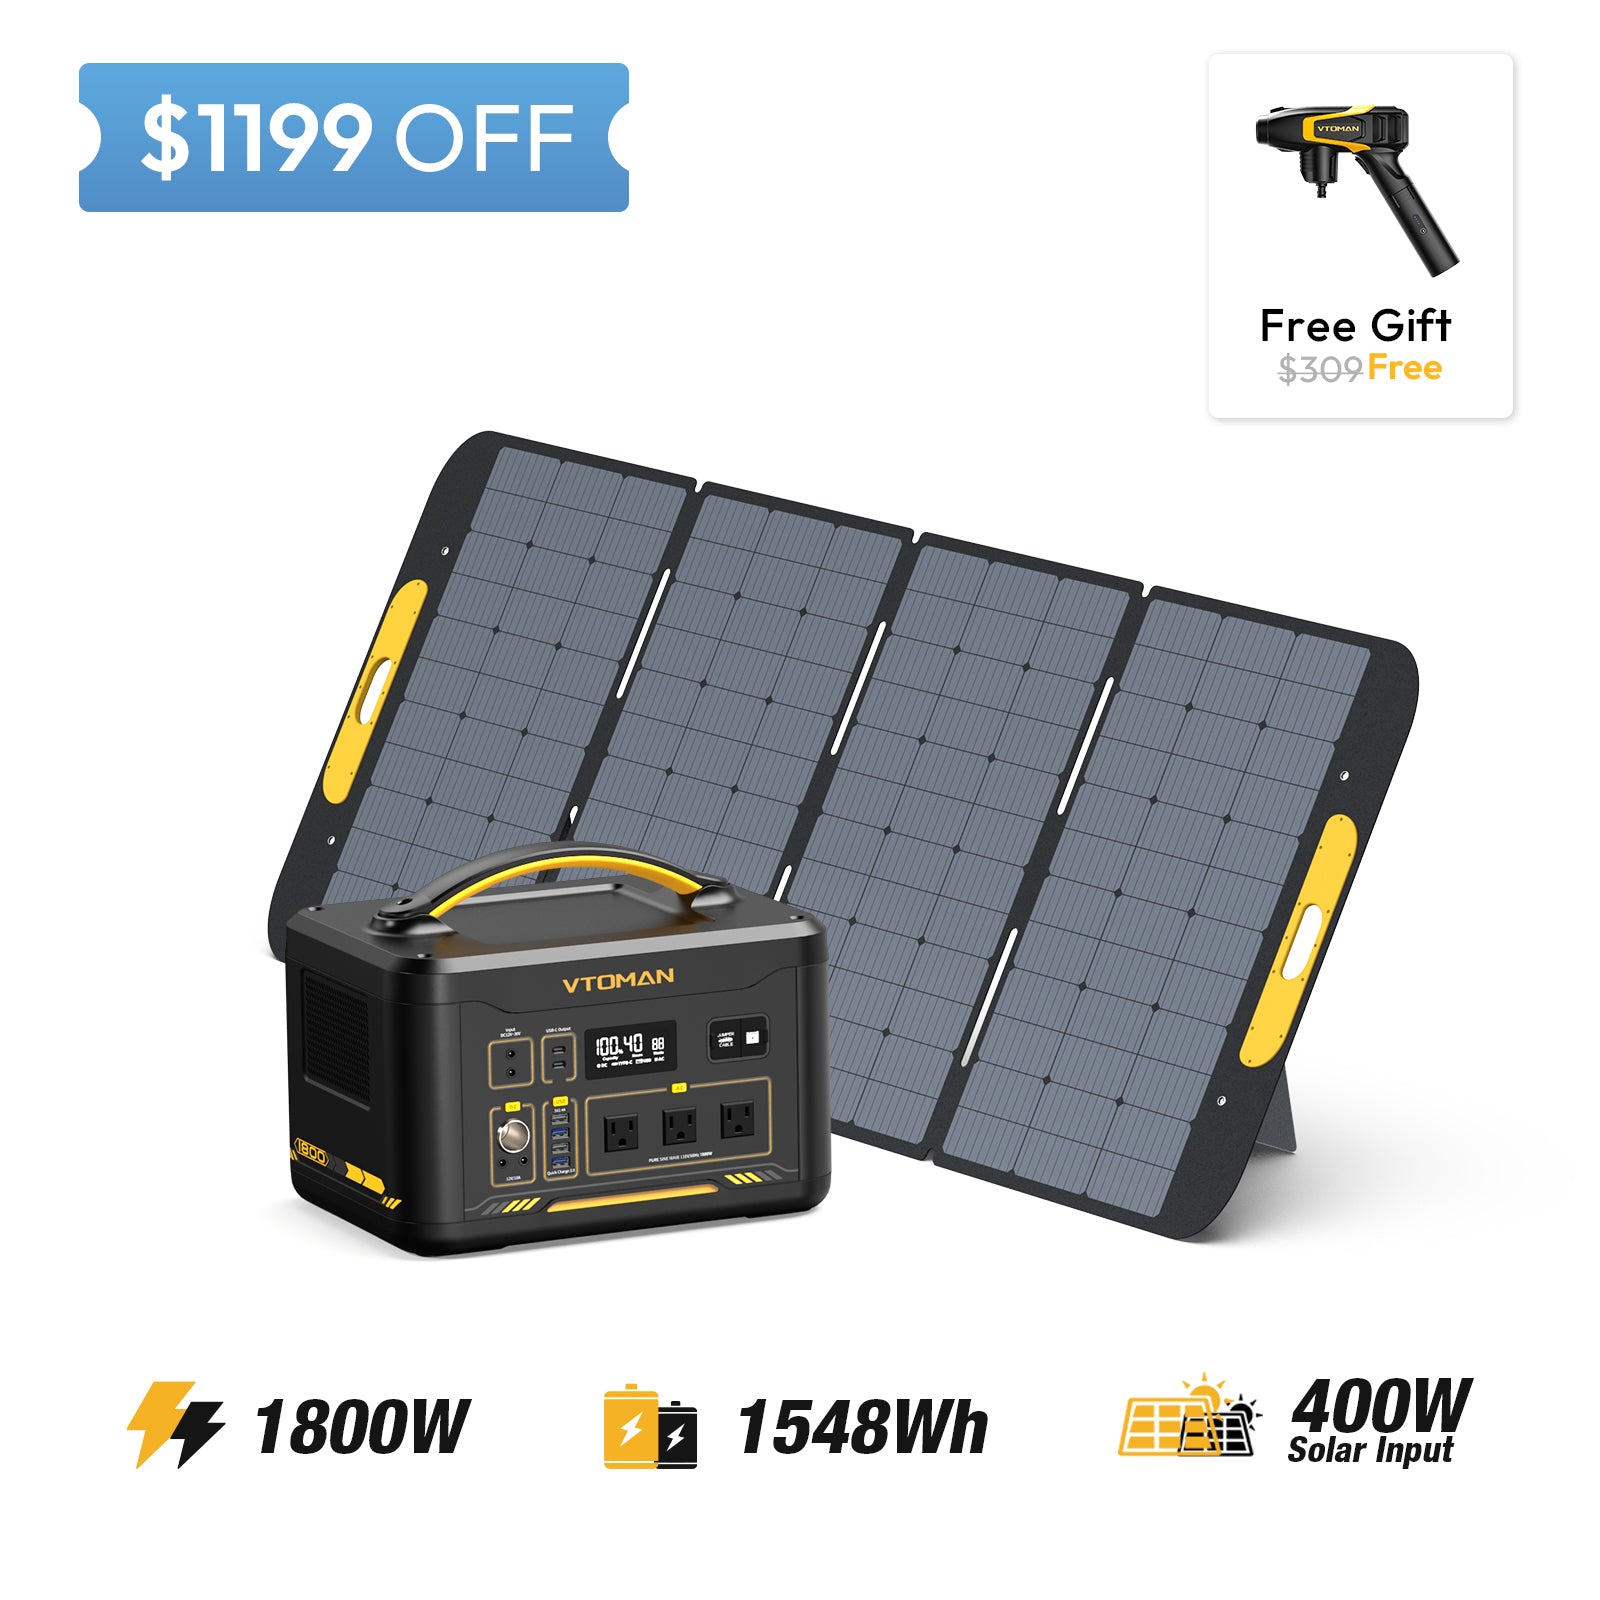 jump 1800 and 400W solar panel save $1199 in summer sale